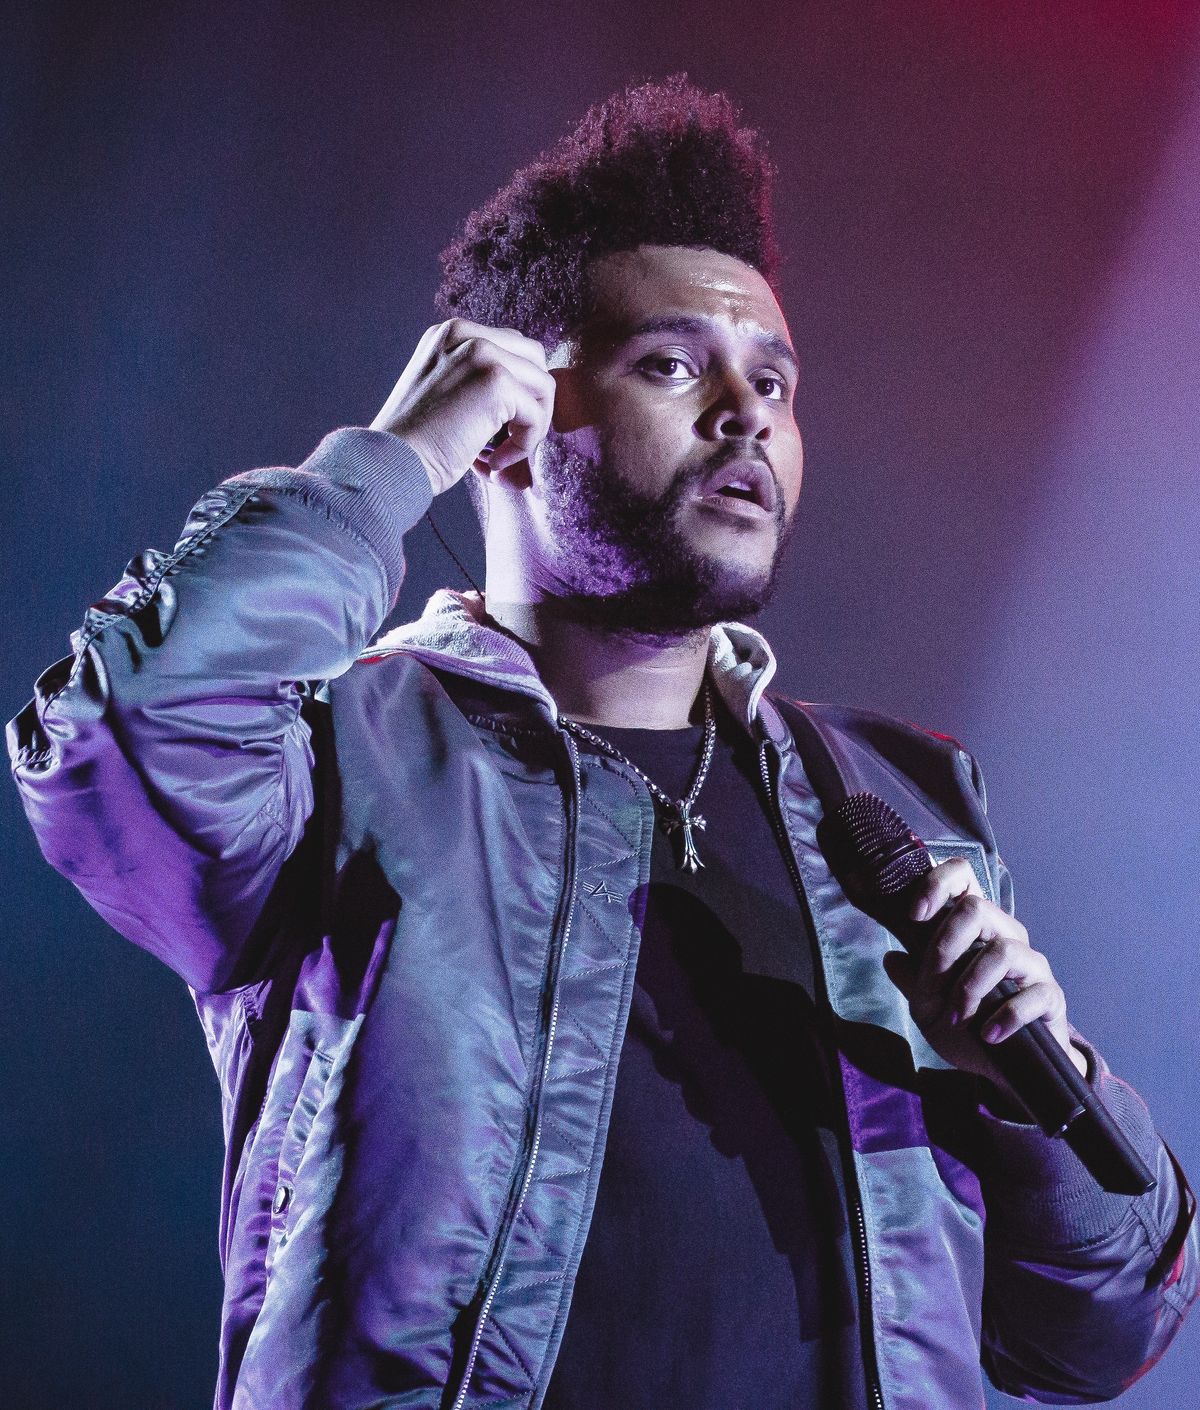 6 Lyrics From The Weeknd's Album That Anyone With A Broken Heart Can ...